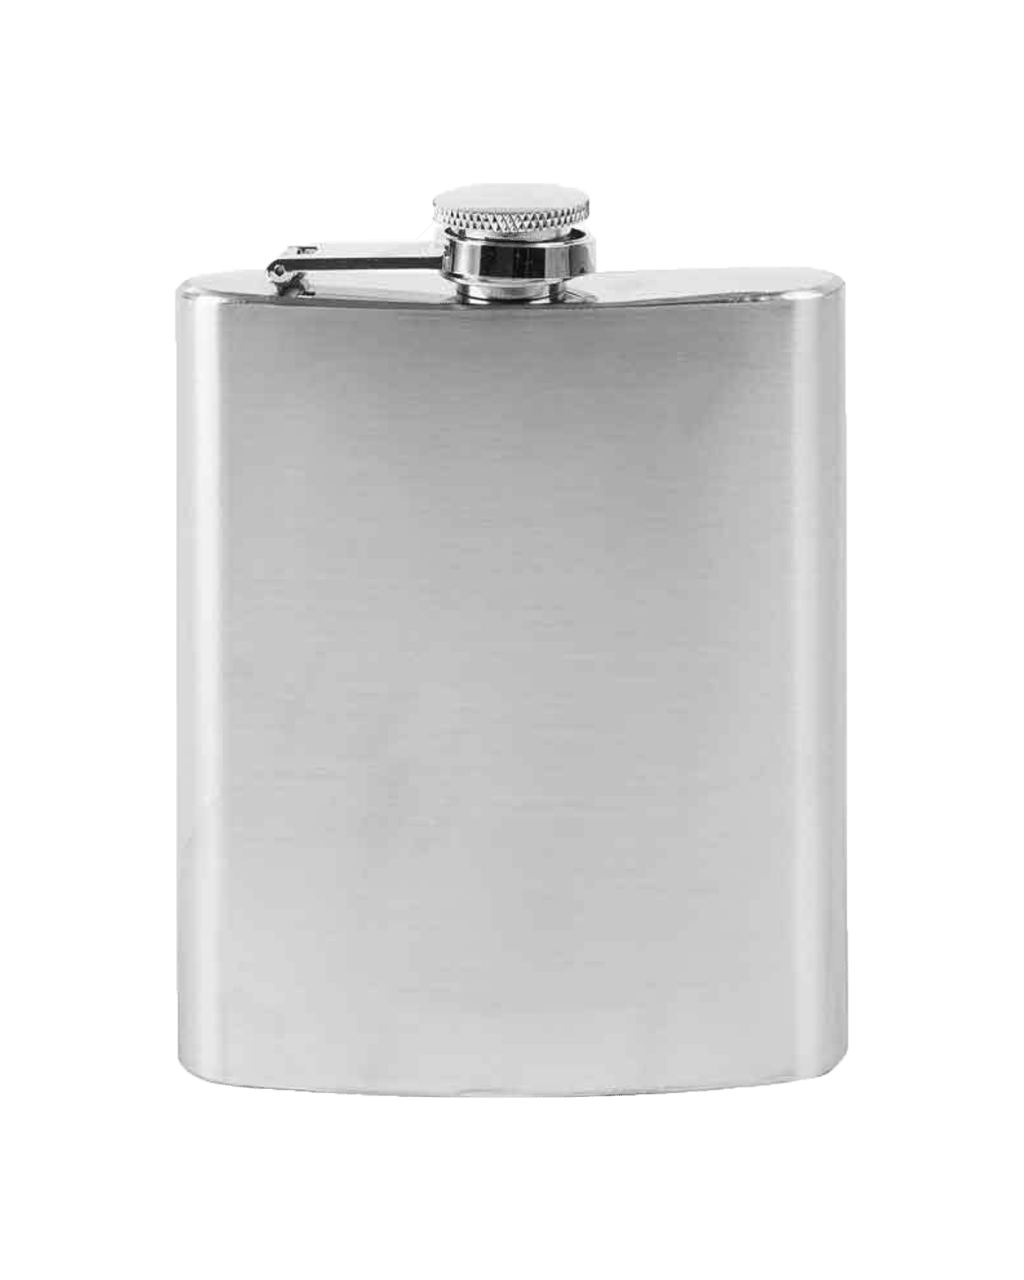 2X 7oz Hip Flask Stainless Steel Wine Whiskey Liquor Alcohol